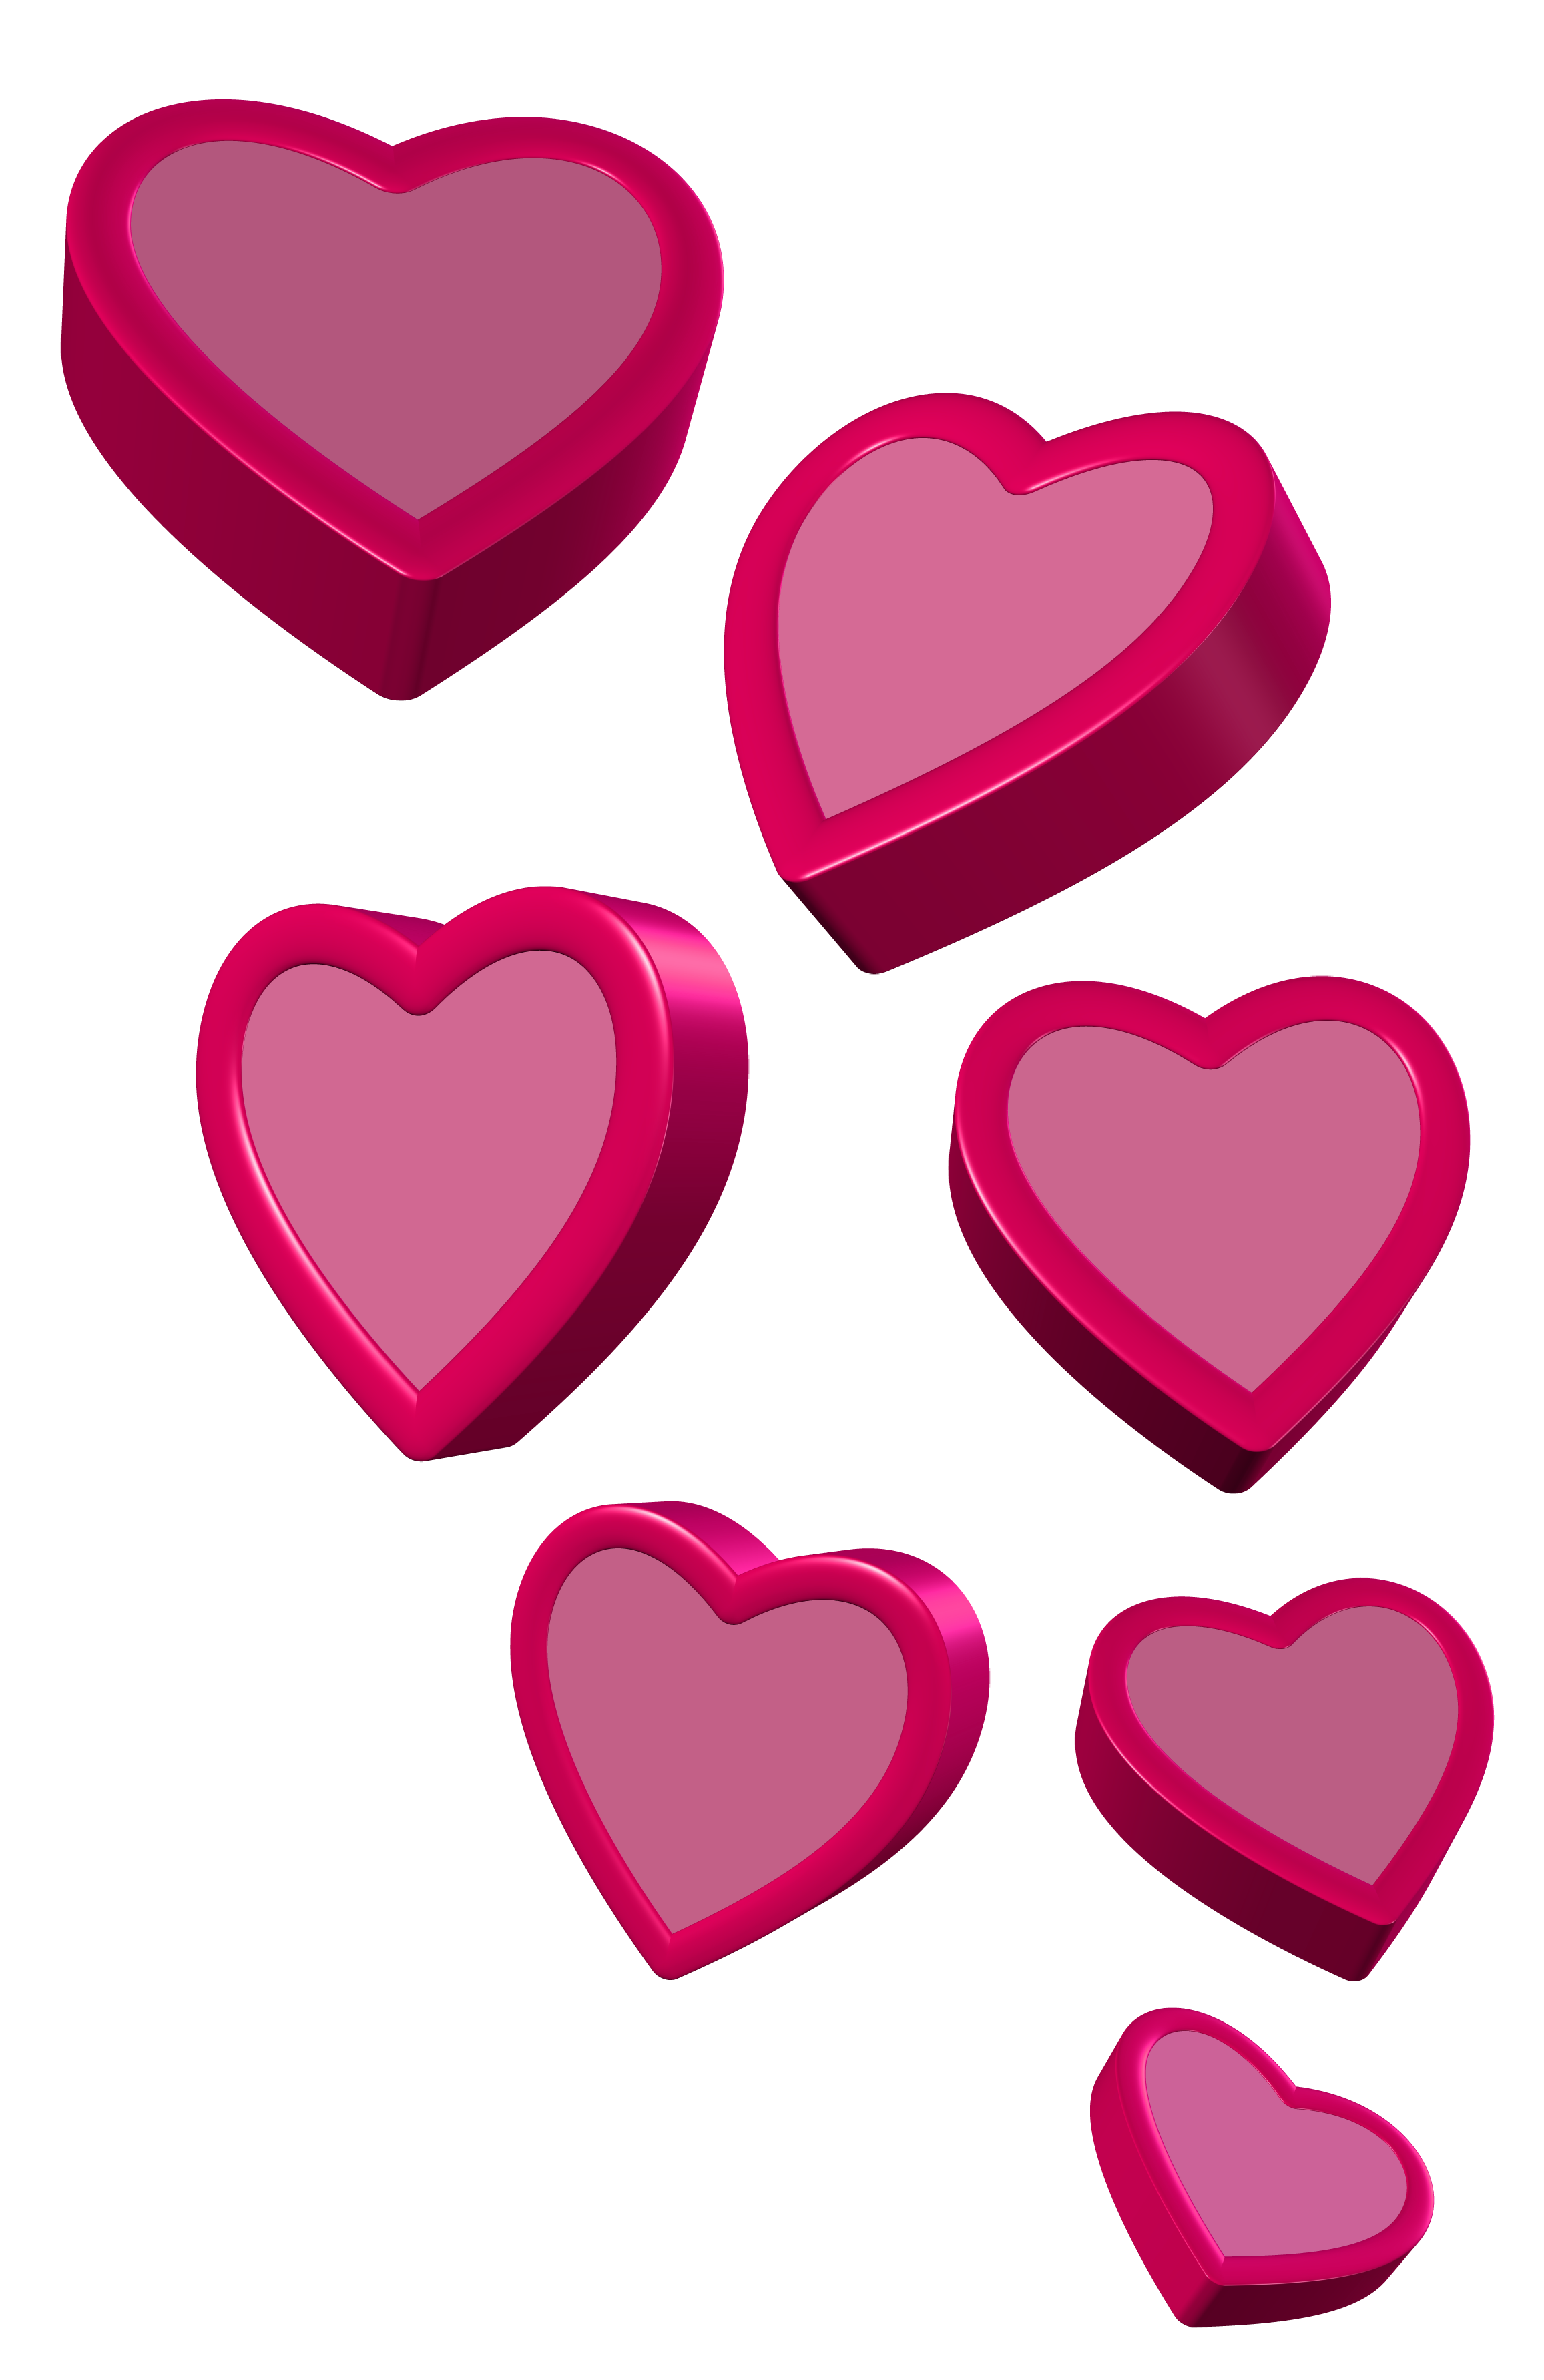 Hearts Image From Gallery Yopriceville Var Albums Clipart